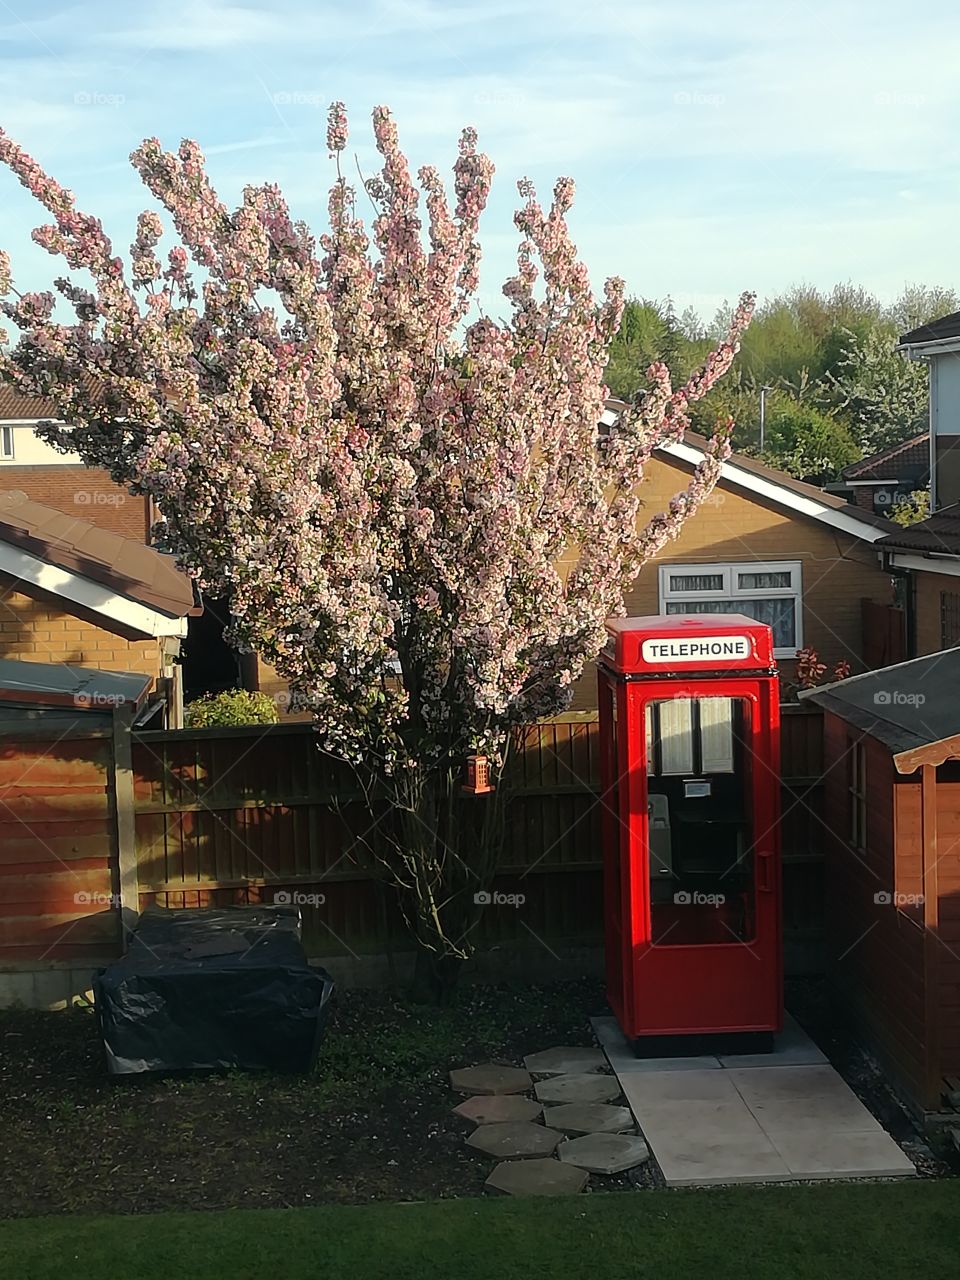 Phone box, booming cherry blossom tree and early evening sky.